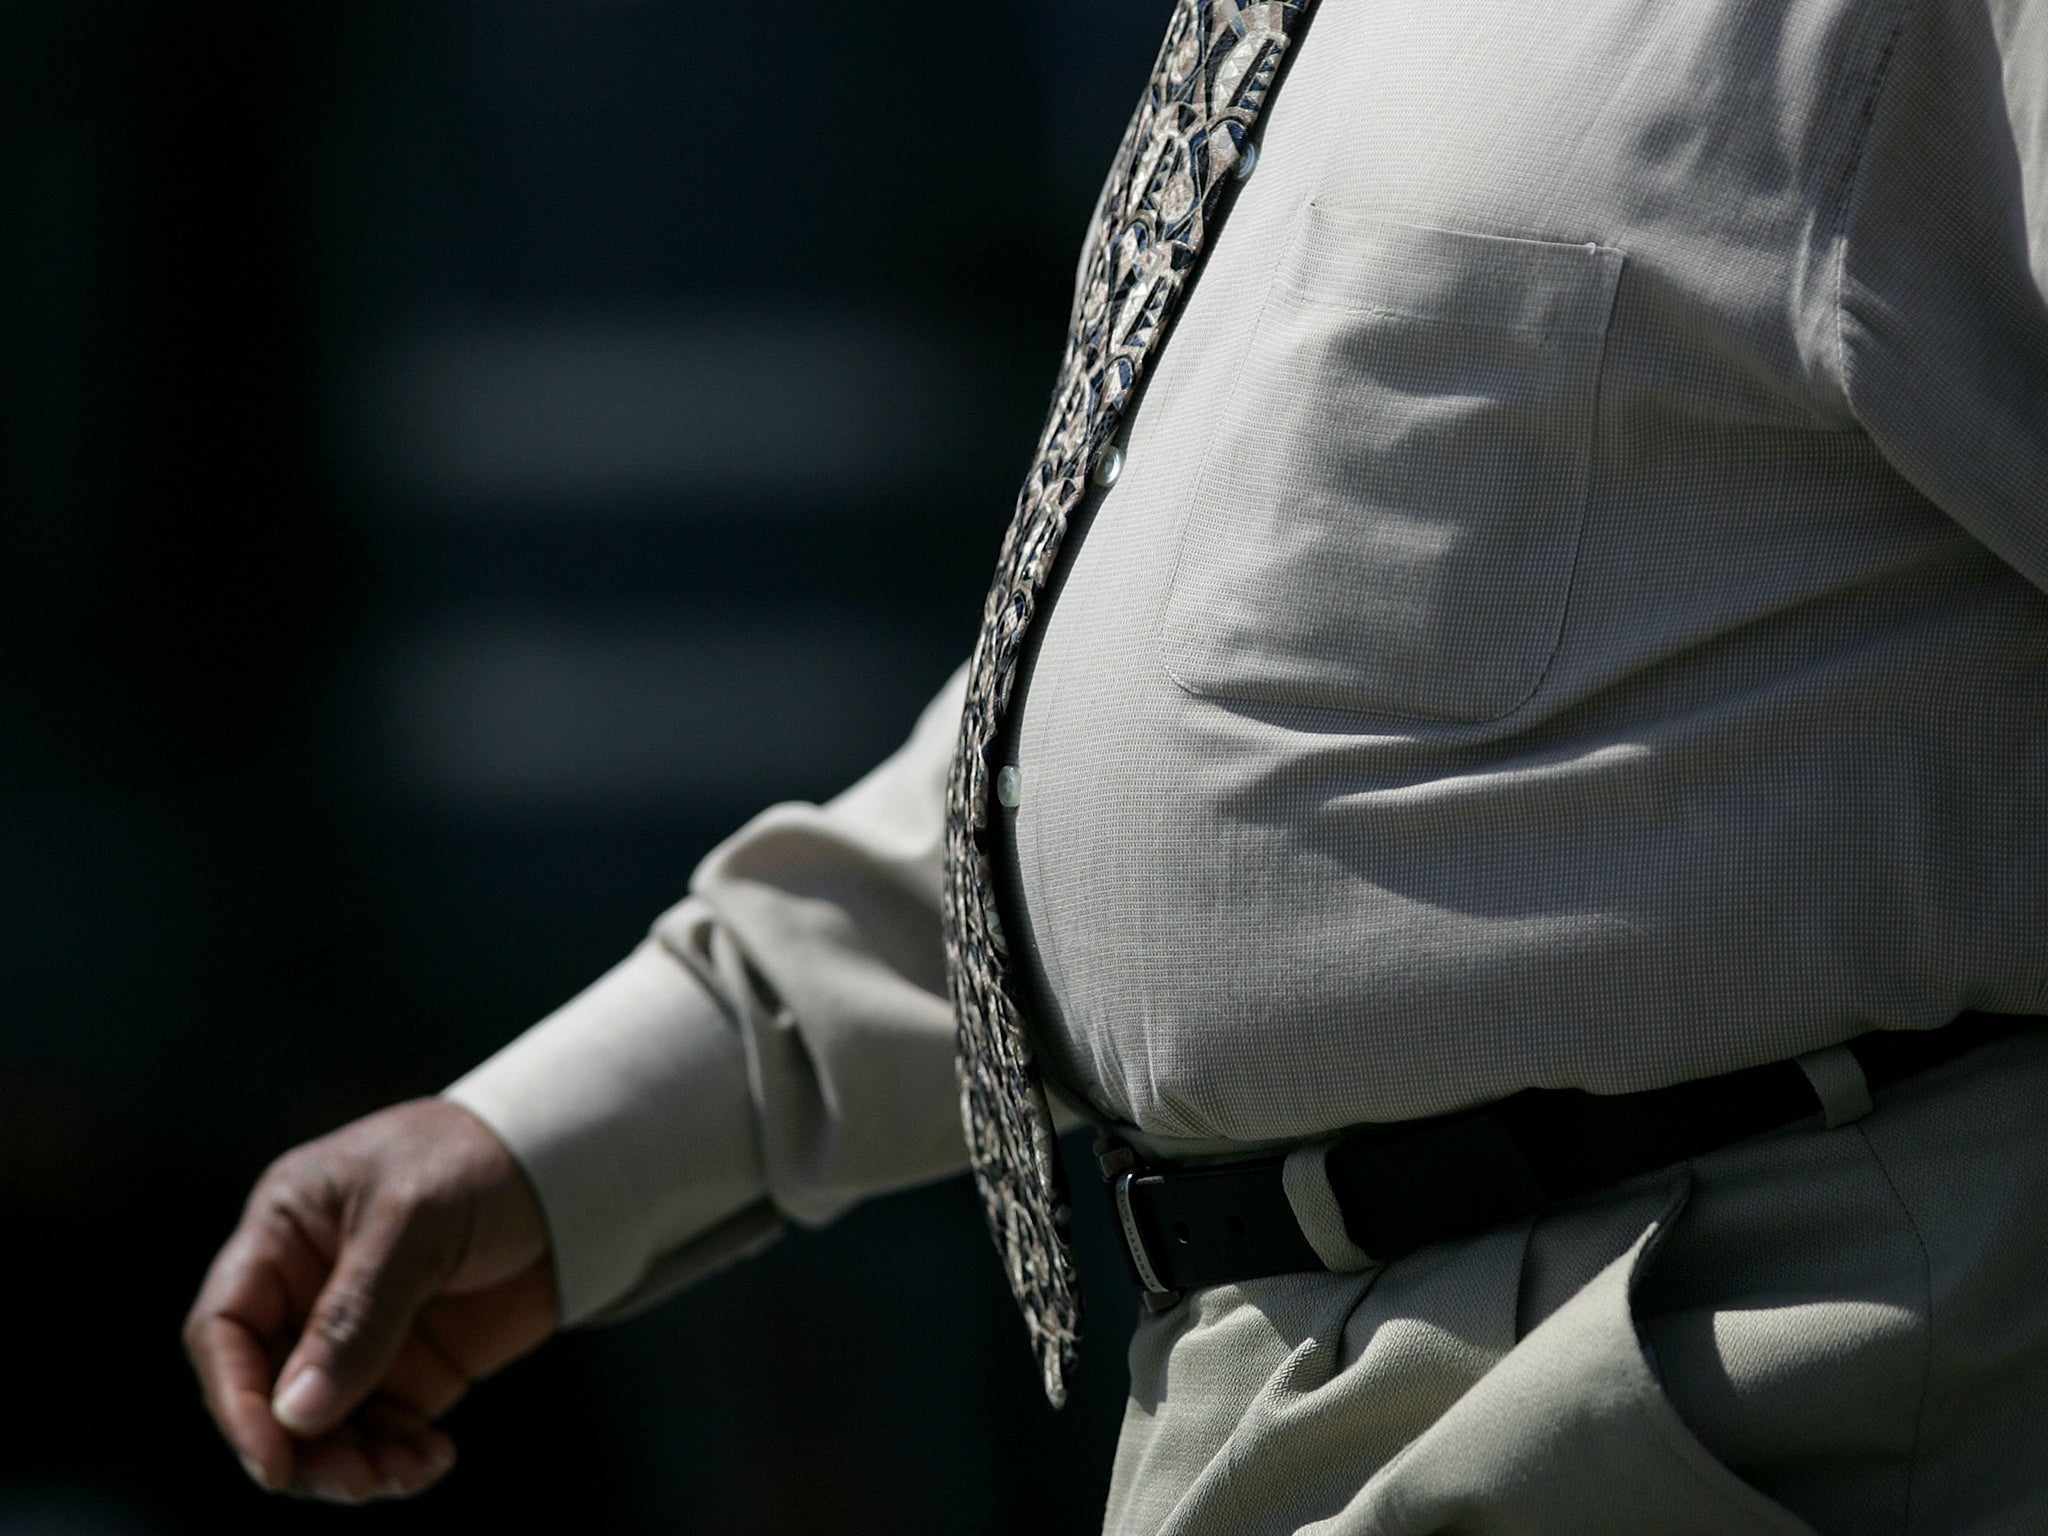 Having a a bit of belly could be bad for your health, but is that always true?